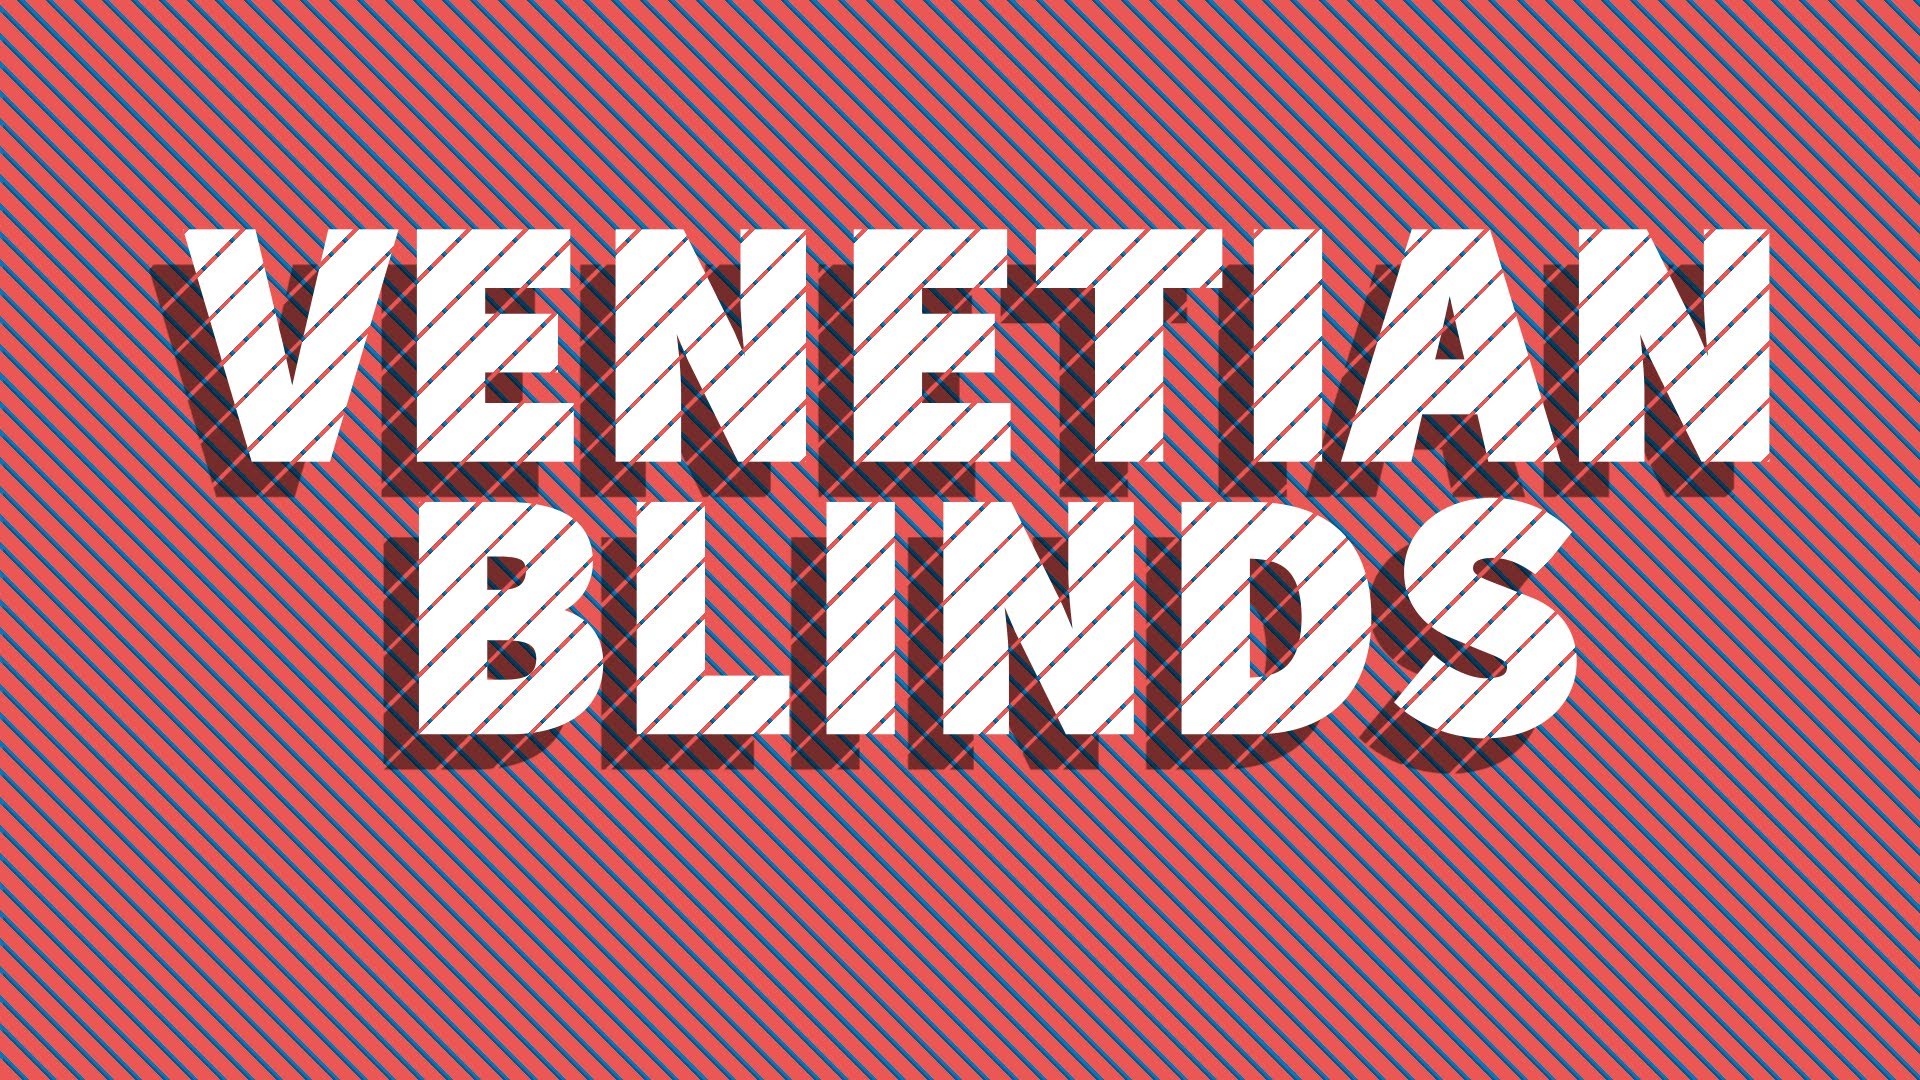 Venetian Blinds - Adobe After Effects Lesson - YouTube